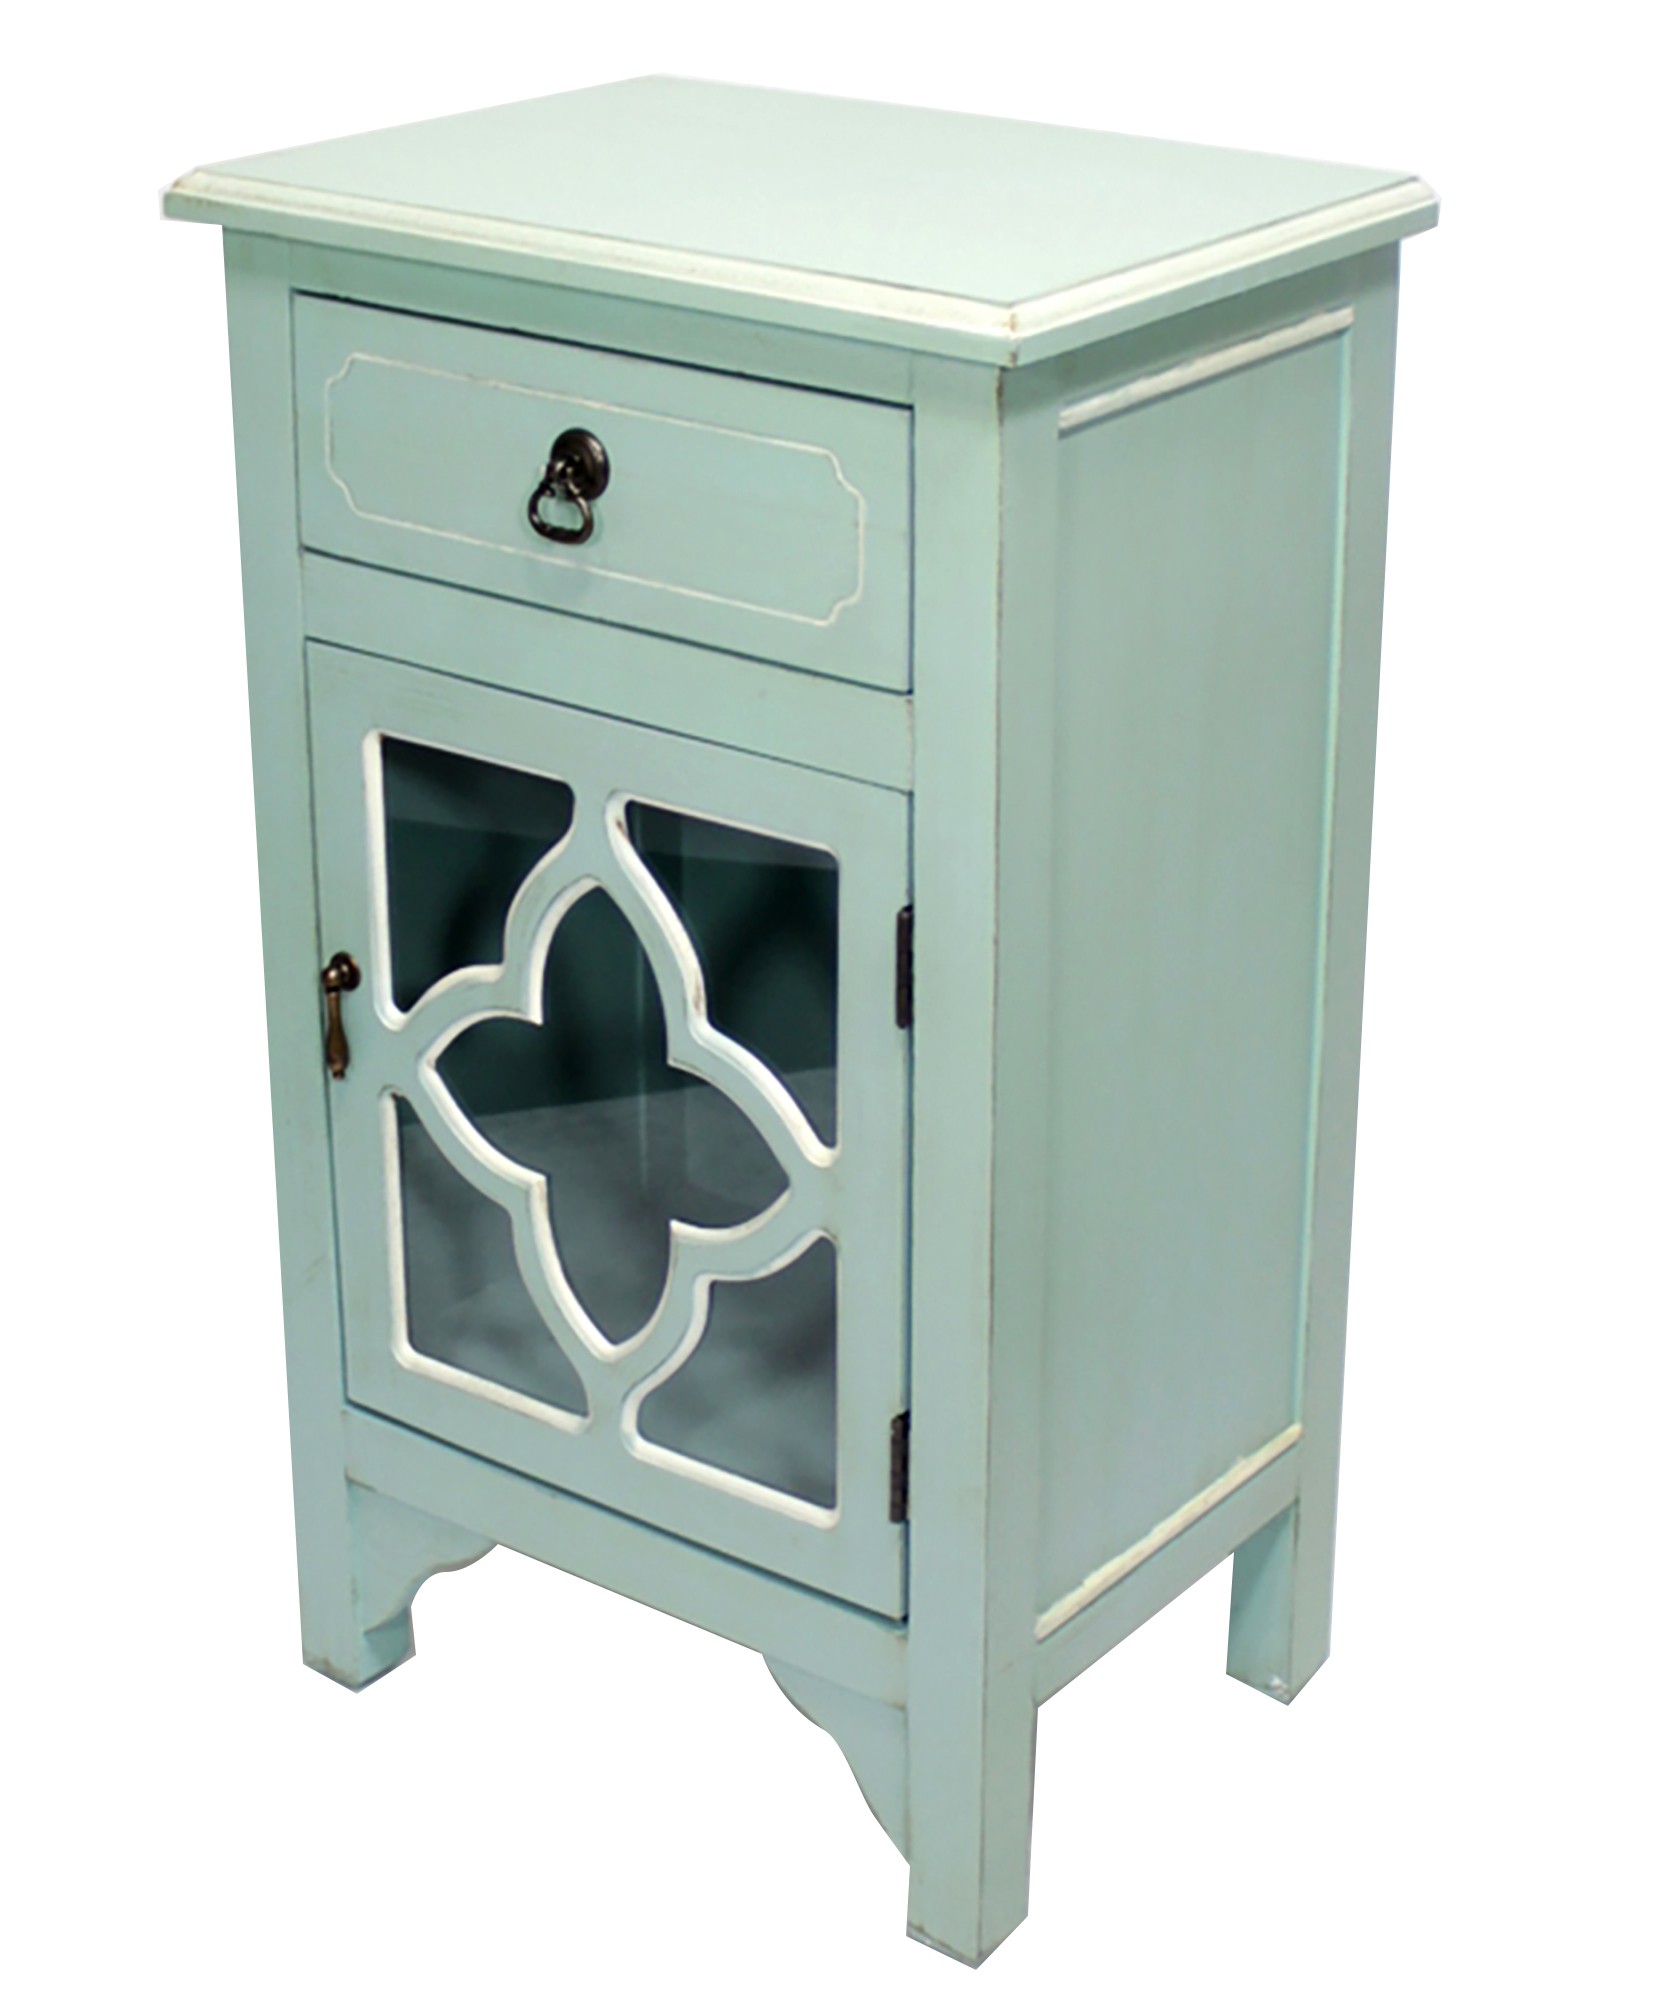 18" X 13" X 30" Light Blue MDF Wood Clear Glass Cabinet with a Drawer and a Door